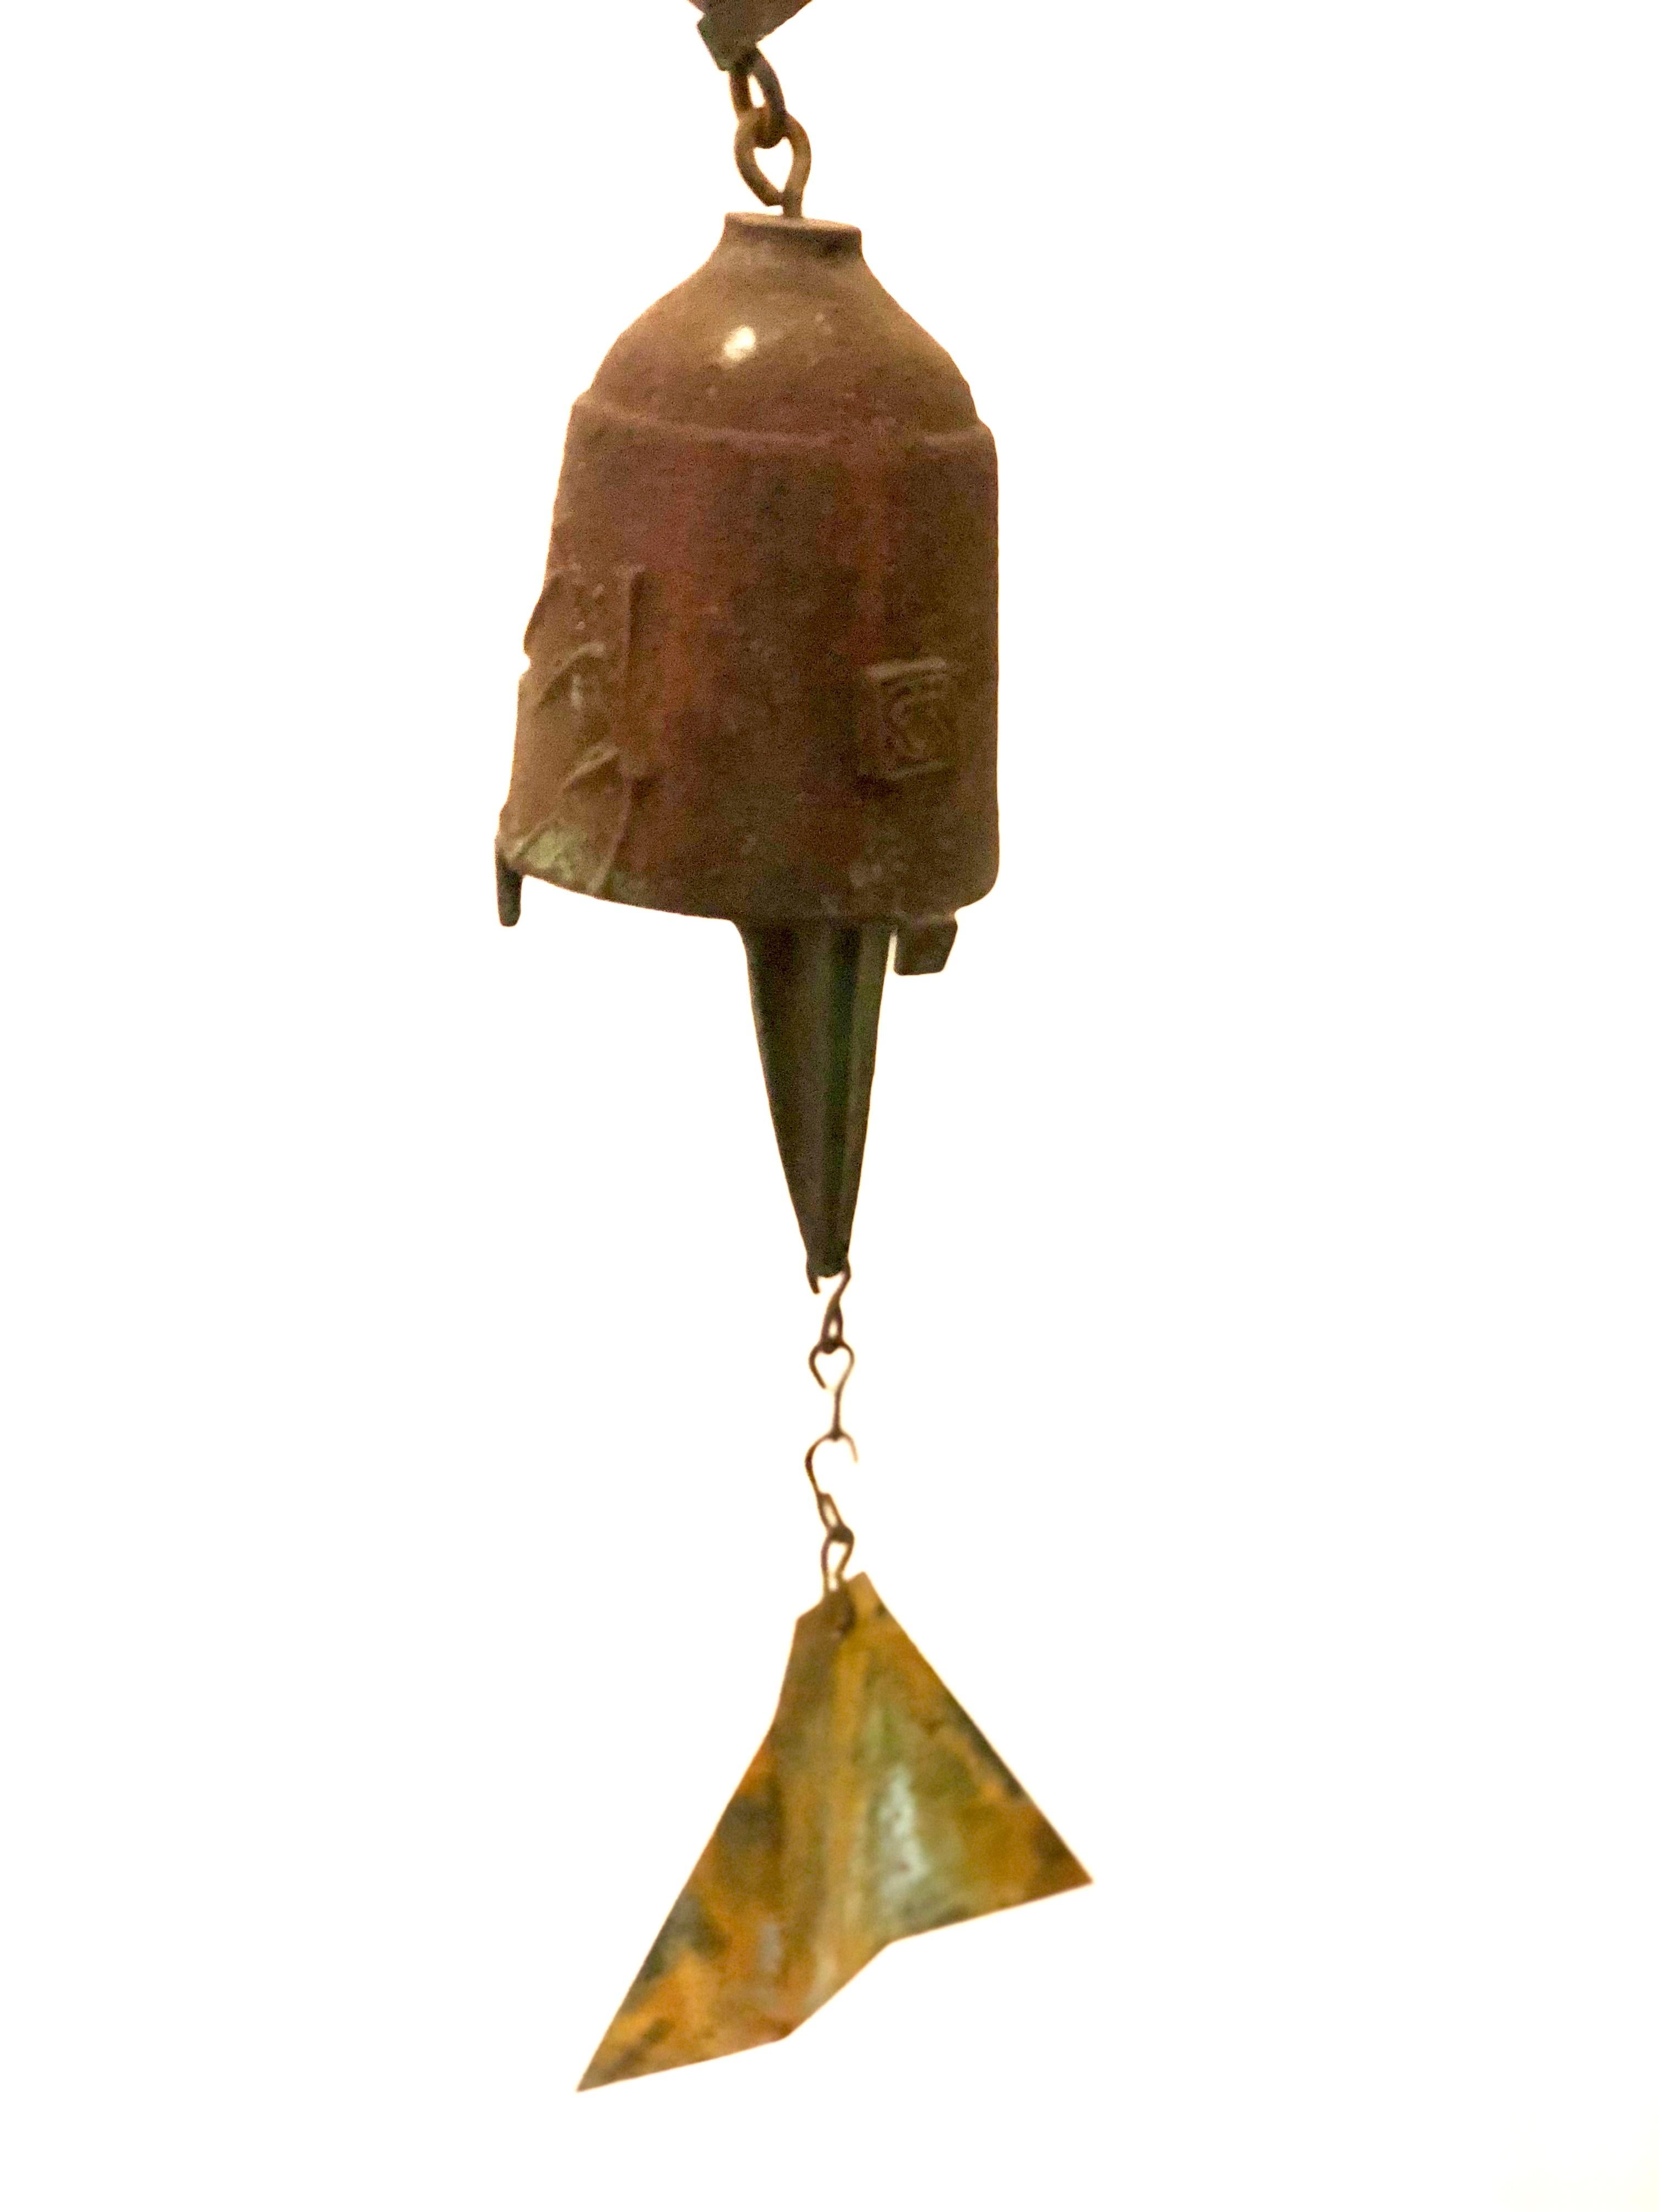 American Brutalist Bronze Bell by Paolo Soleri